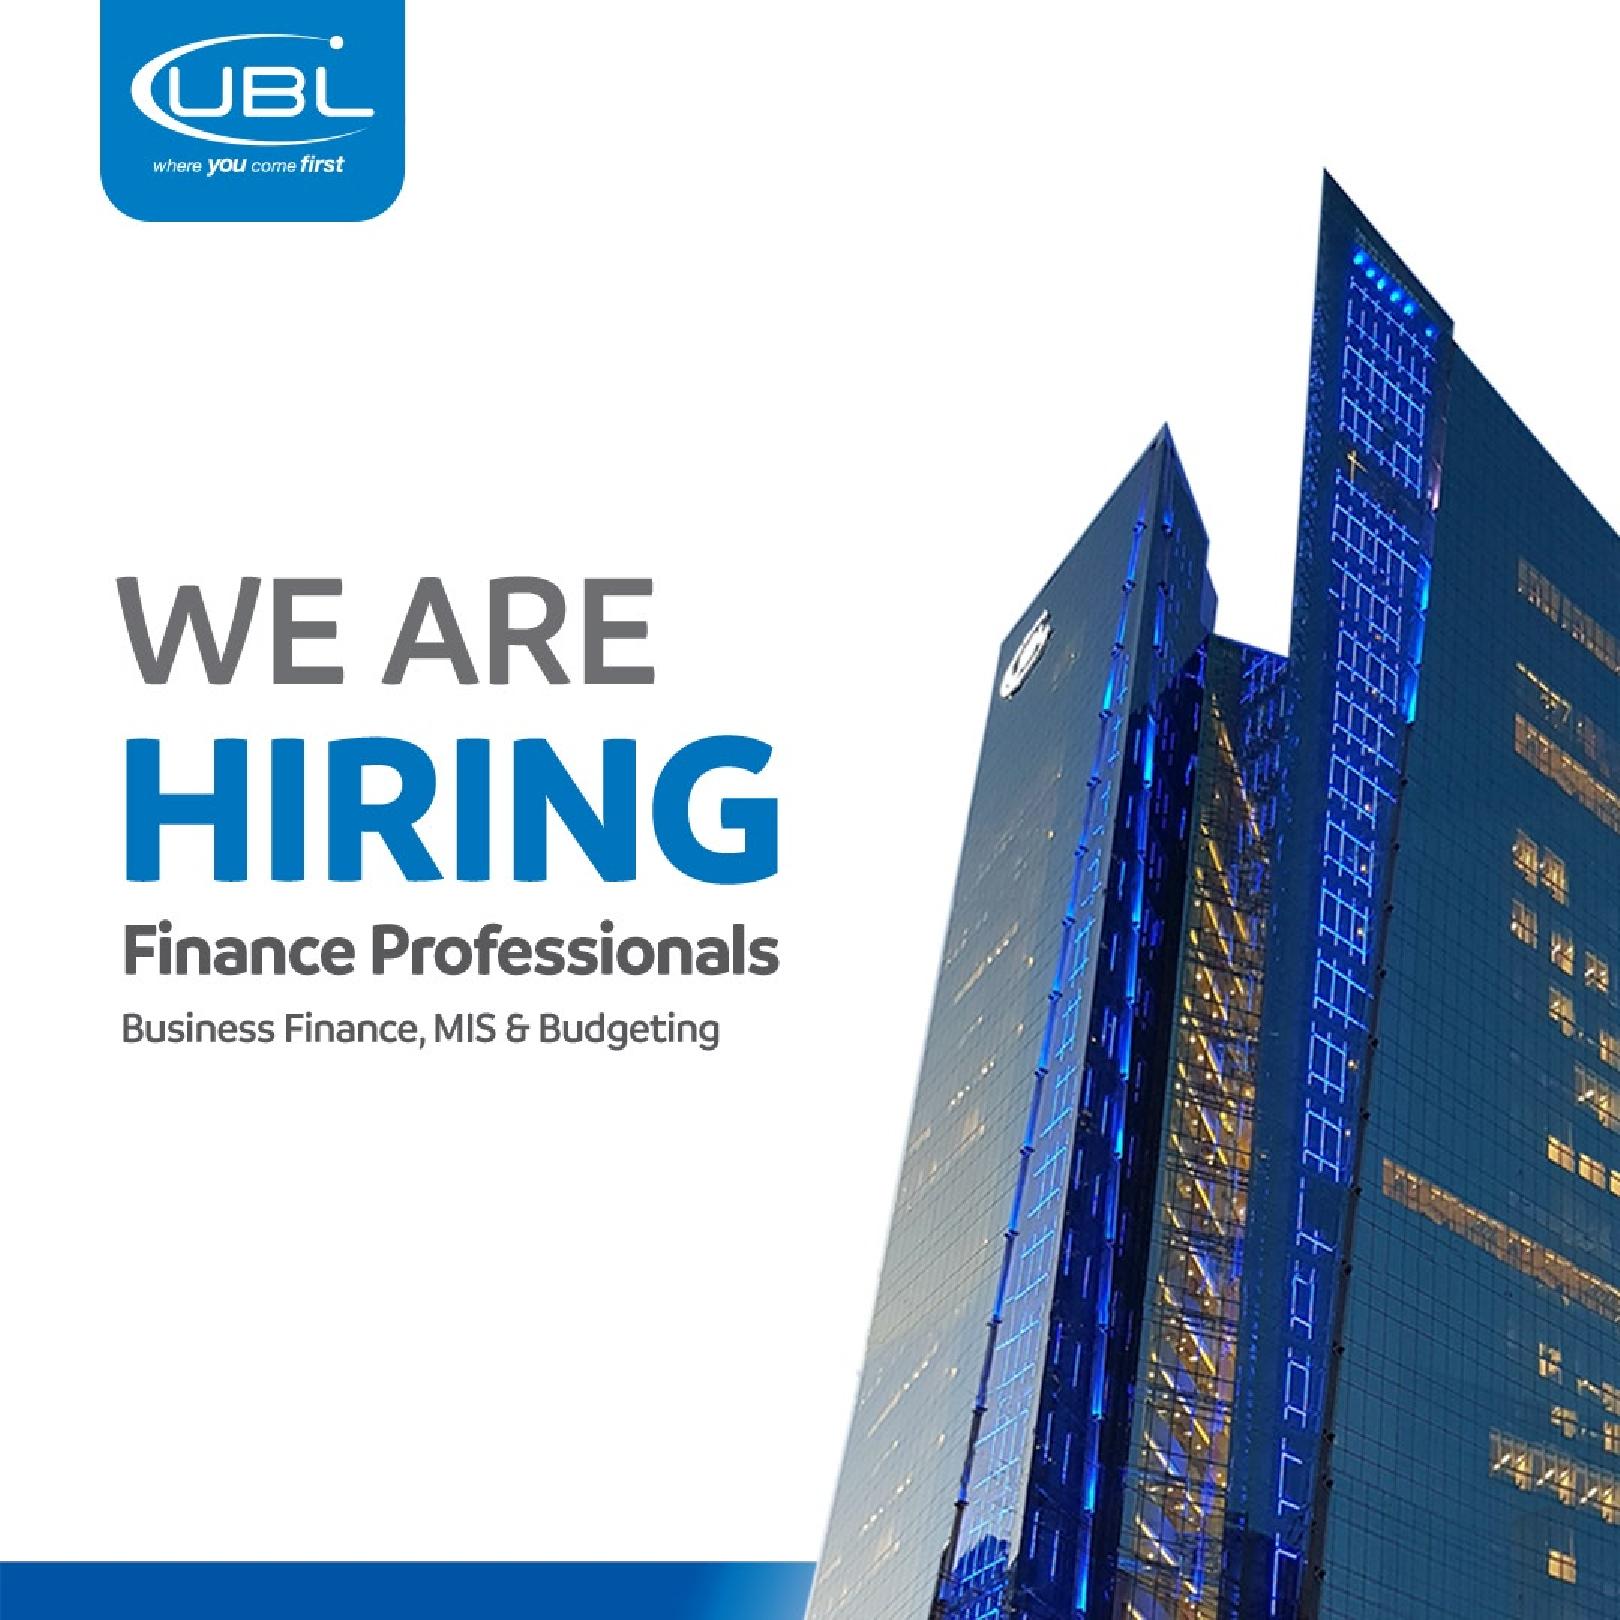 United Bank Limited (UBL) is hiring Finance Professionals - Business Finance, MIS and Budgeting